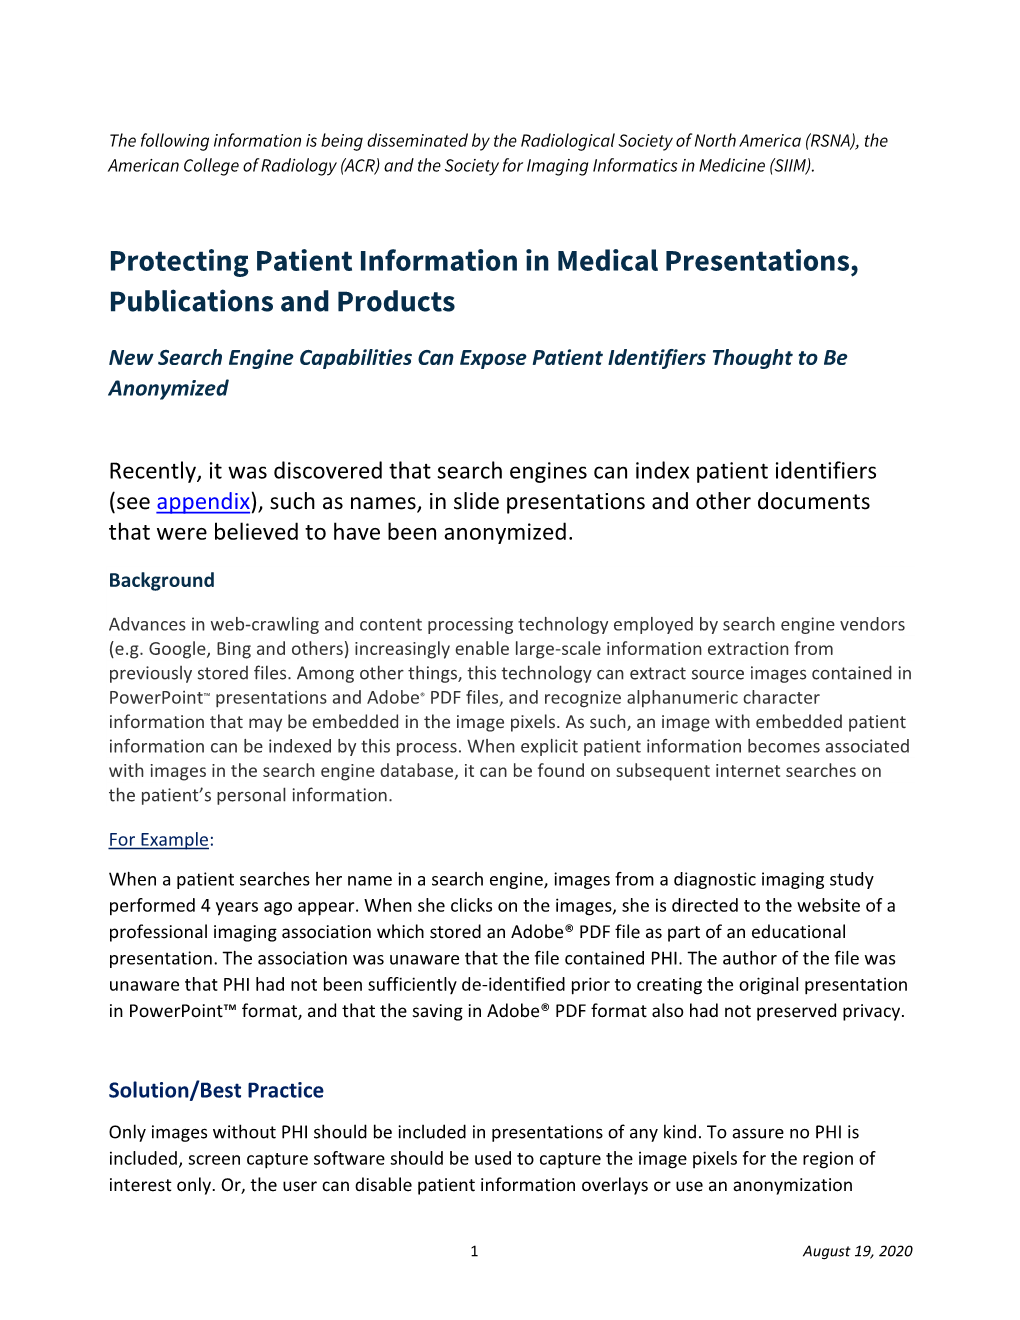 Protecting Patient Information in Medical Presentations, Publications and Products